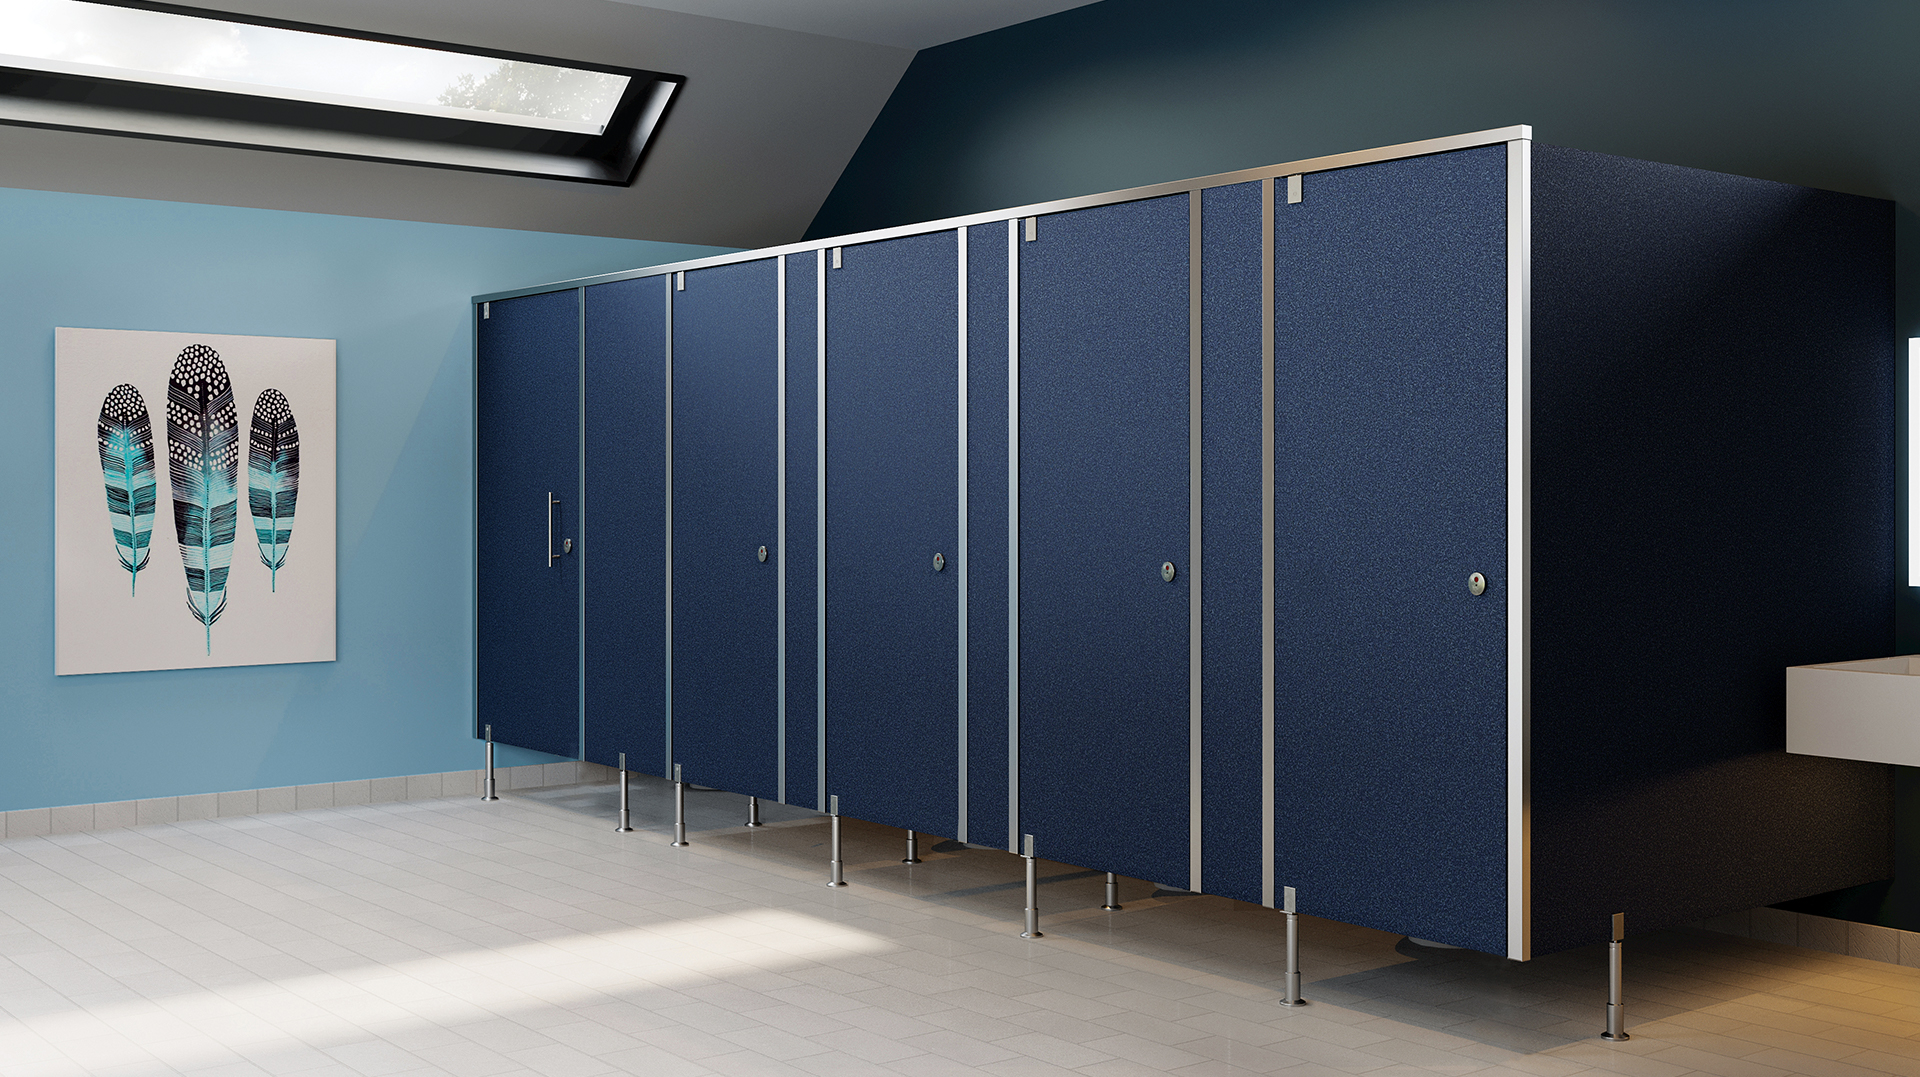 Toilet Partitions Bathroom Stalls Restroom Stalls And All, 58% OFF